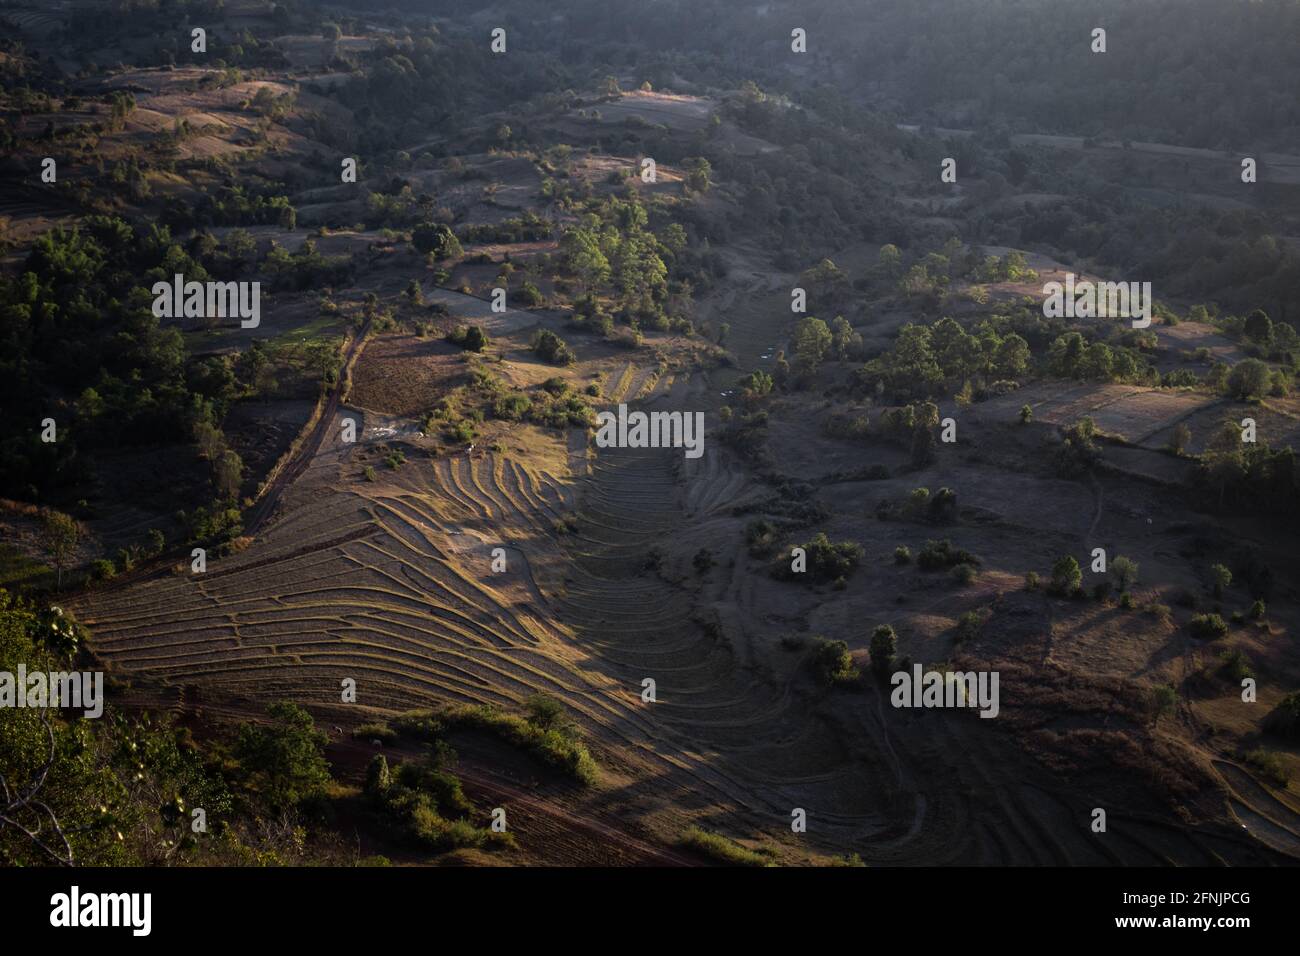 Viewpoing looking out over beautiful terraced rice fields farm lands during evening sunset between Kalaw and Inle Lake, Shan stat, Myanmar Stock Photo